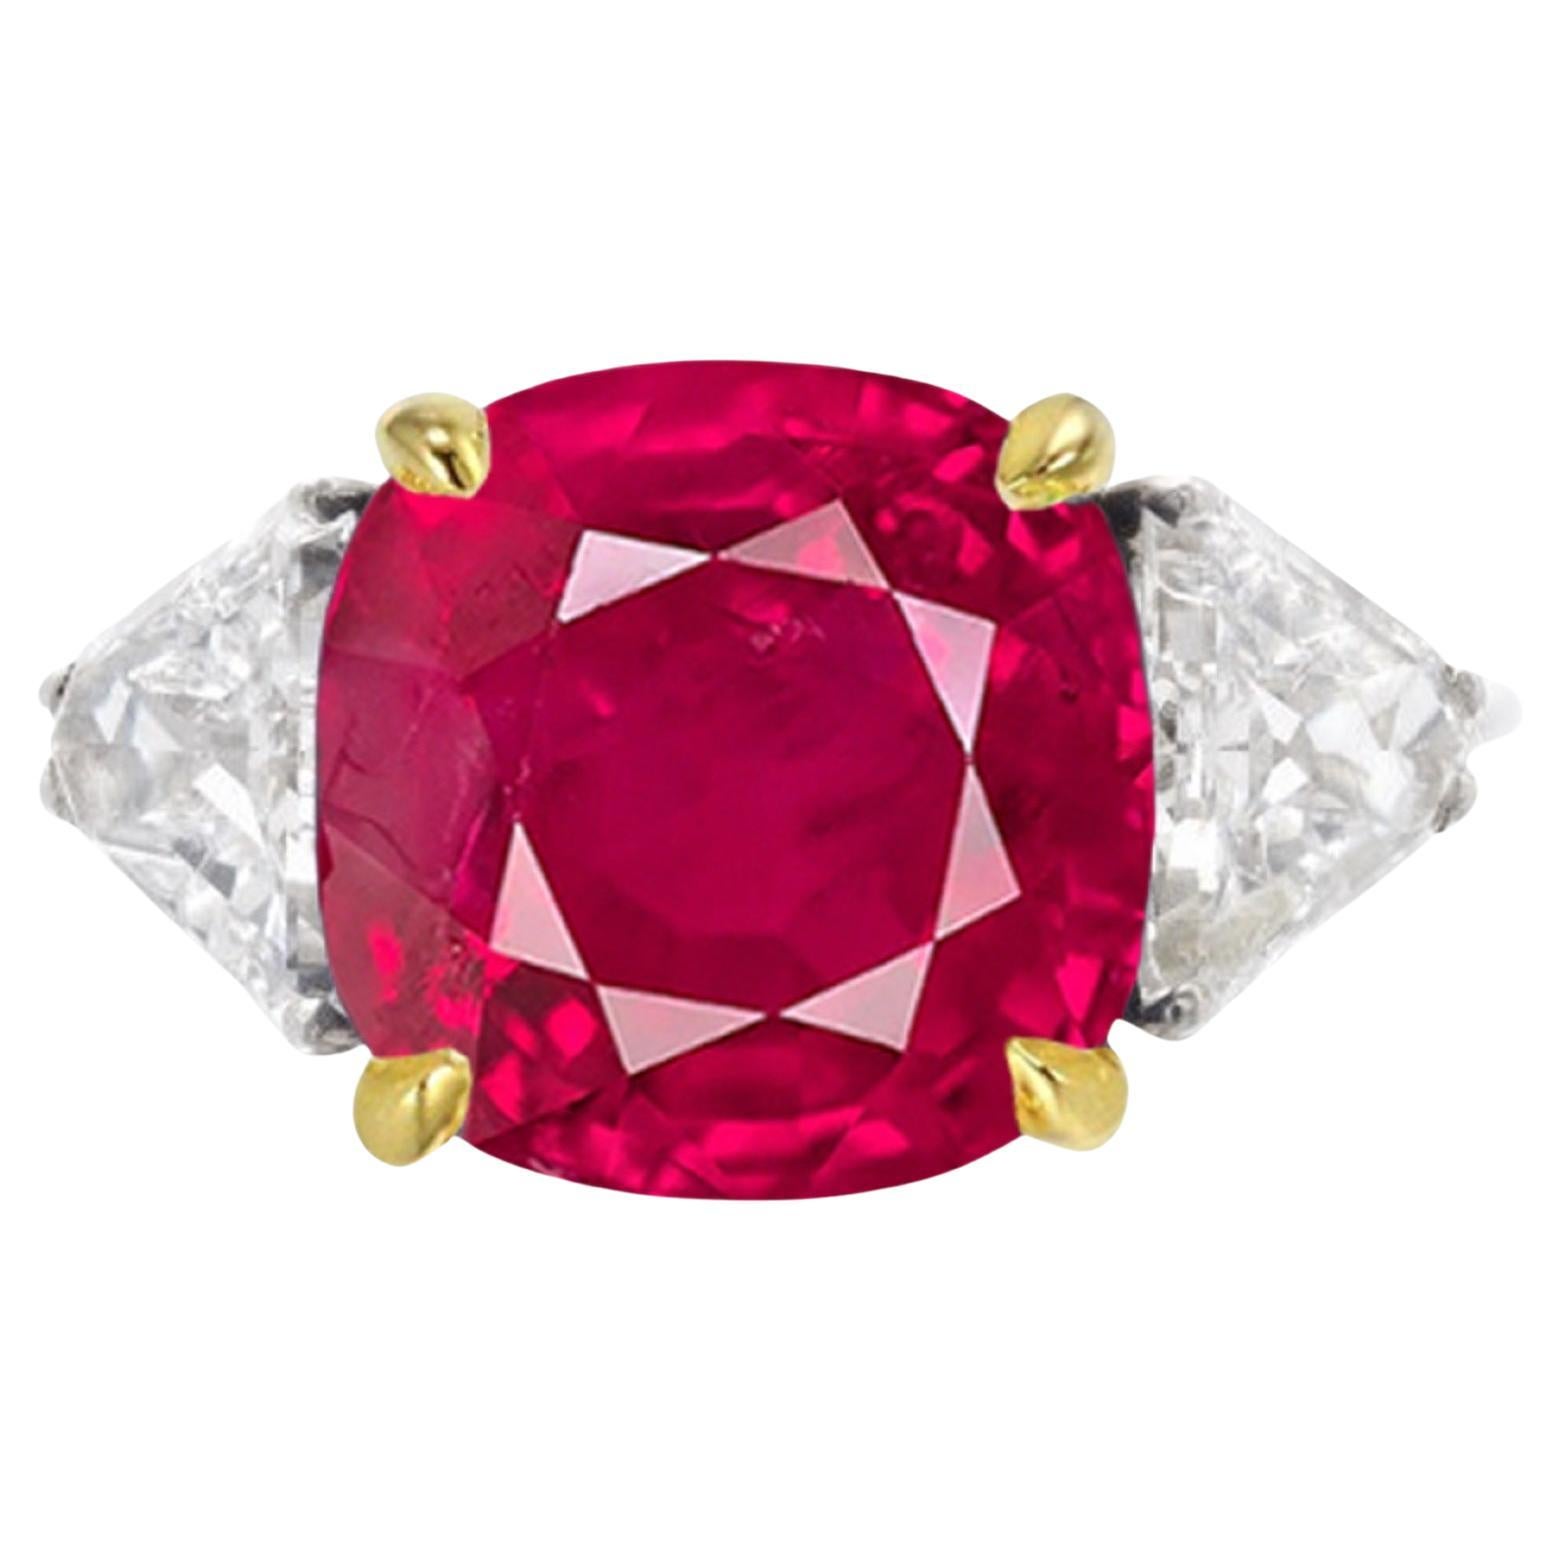 Certified Burma Red Ruby 5 Carat Natural  Ruby Trillion Diamond Ring